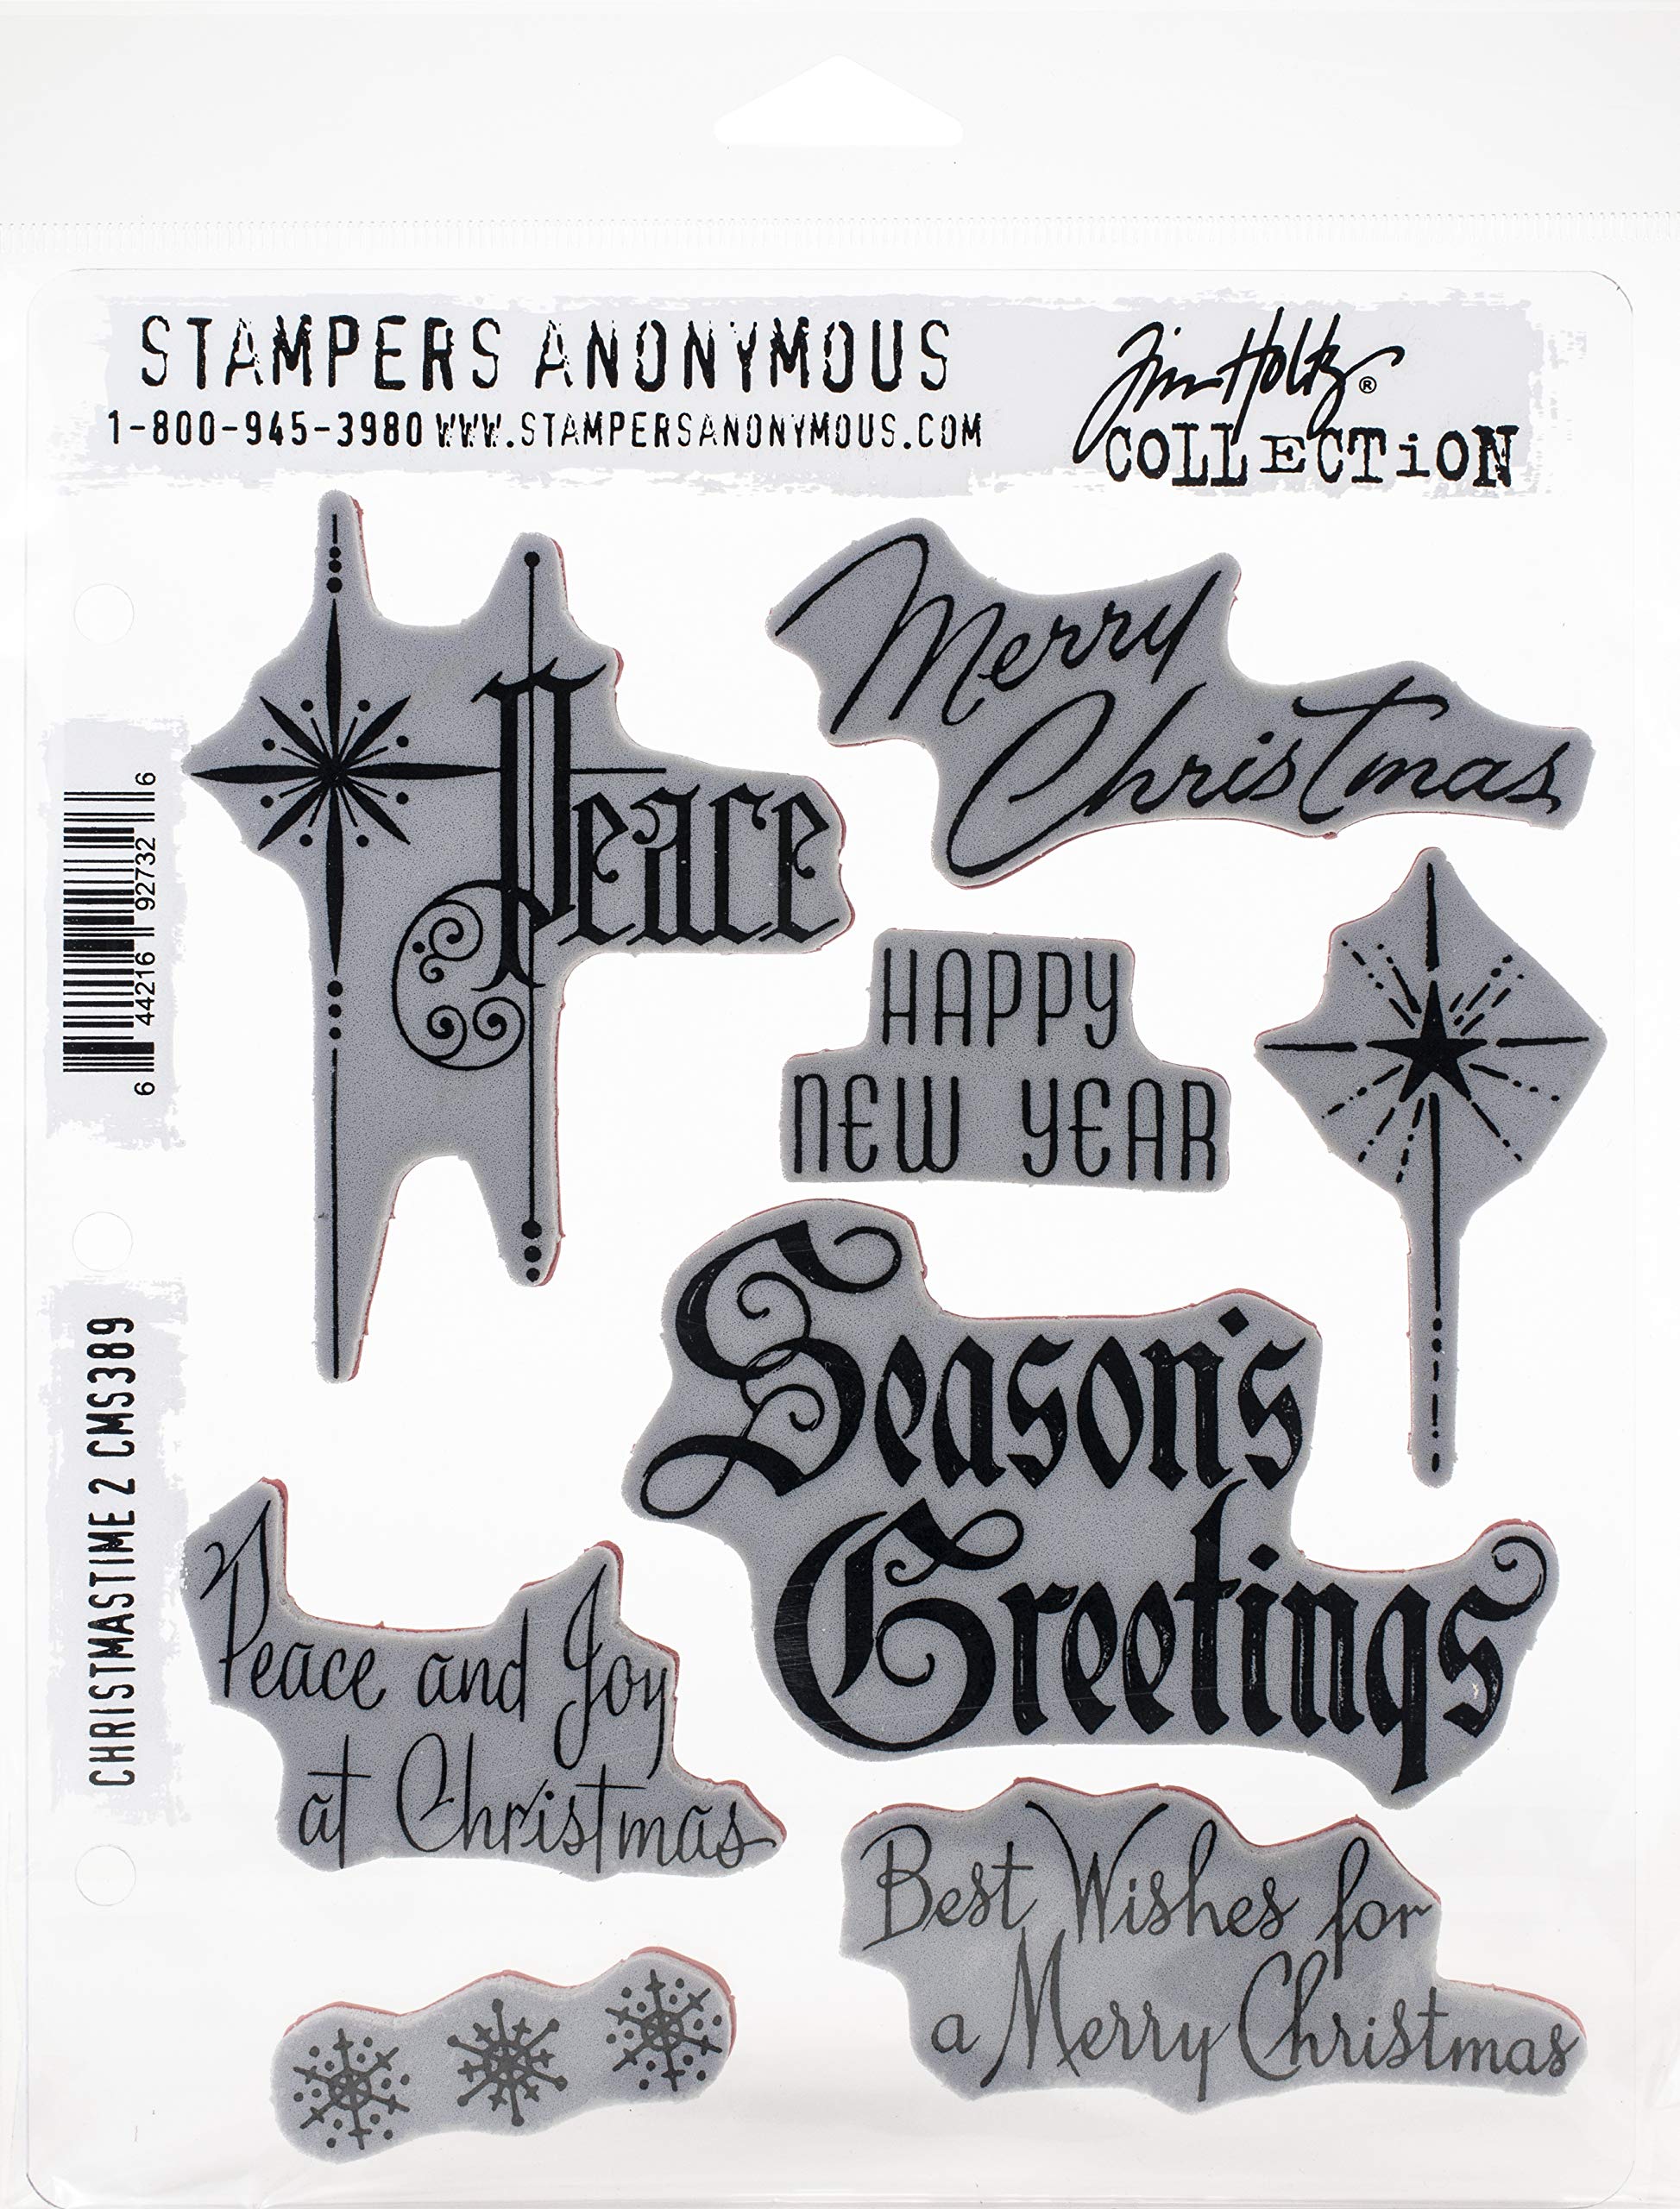 Tim Holtz - Stampers Anon Stempel-Set Cmas #2, Christmastime #2